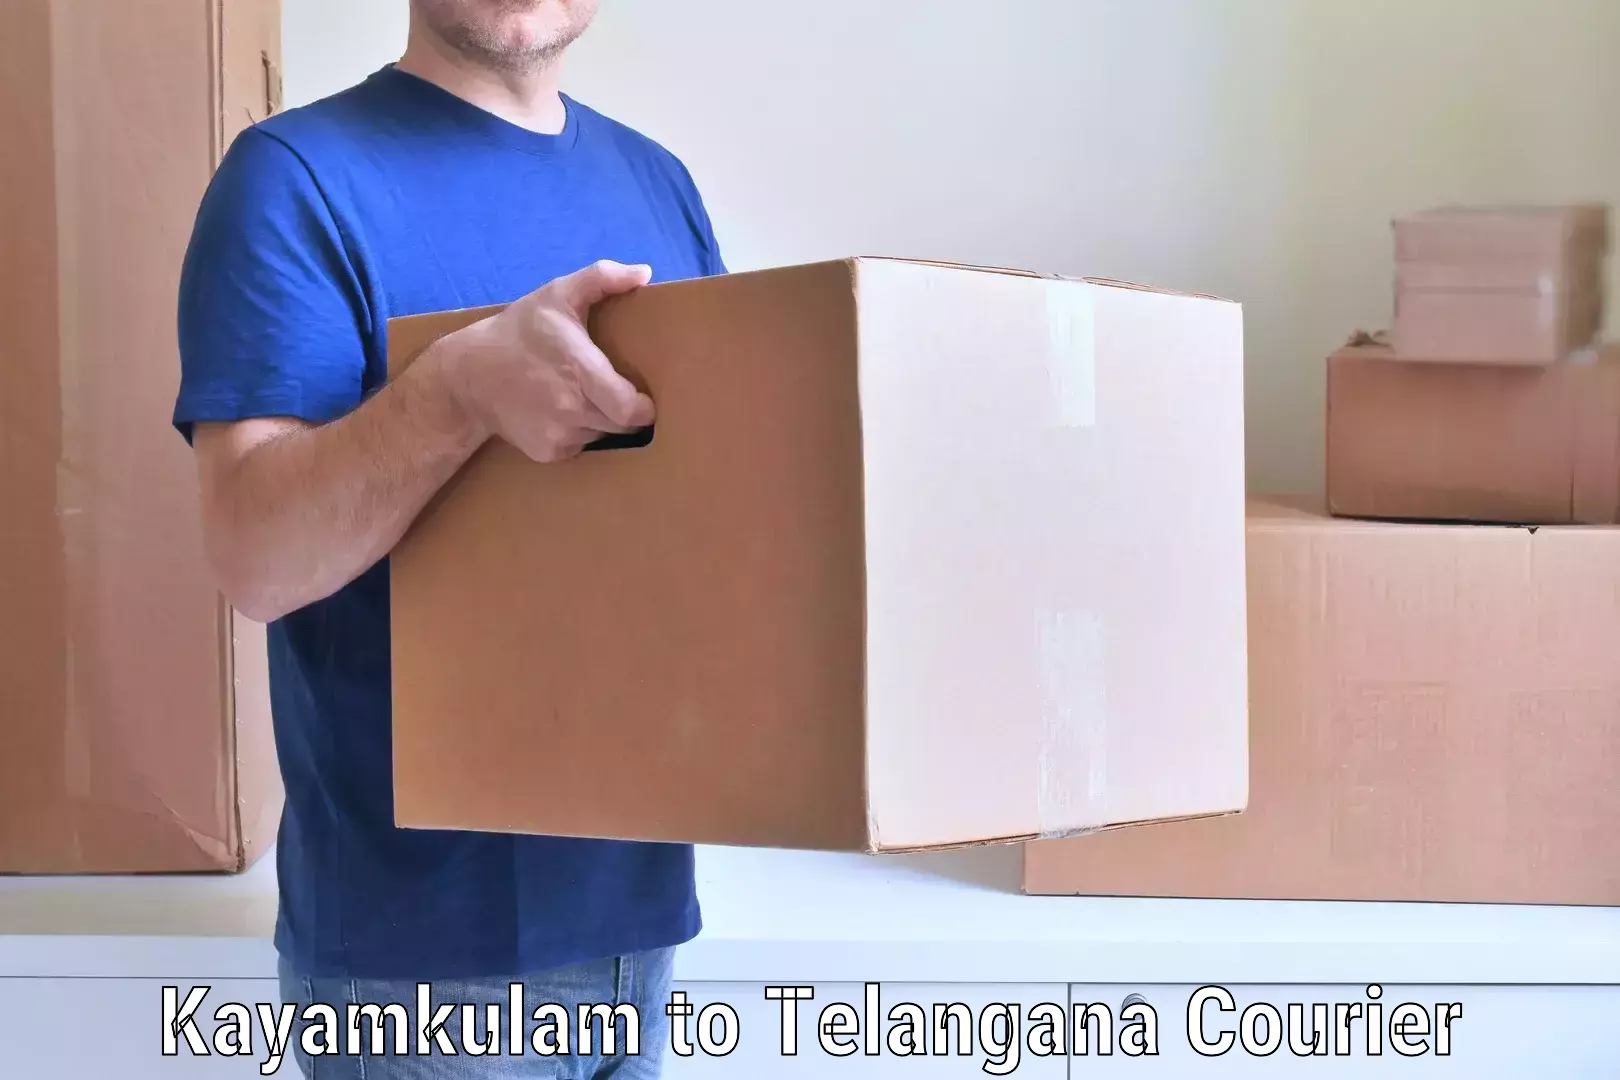 Reliable moving solutions Kayamkulam to Hyderabad